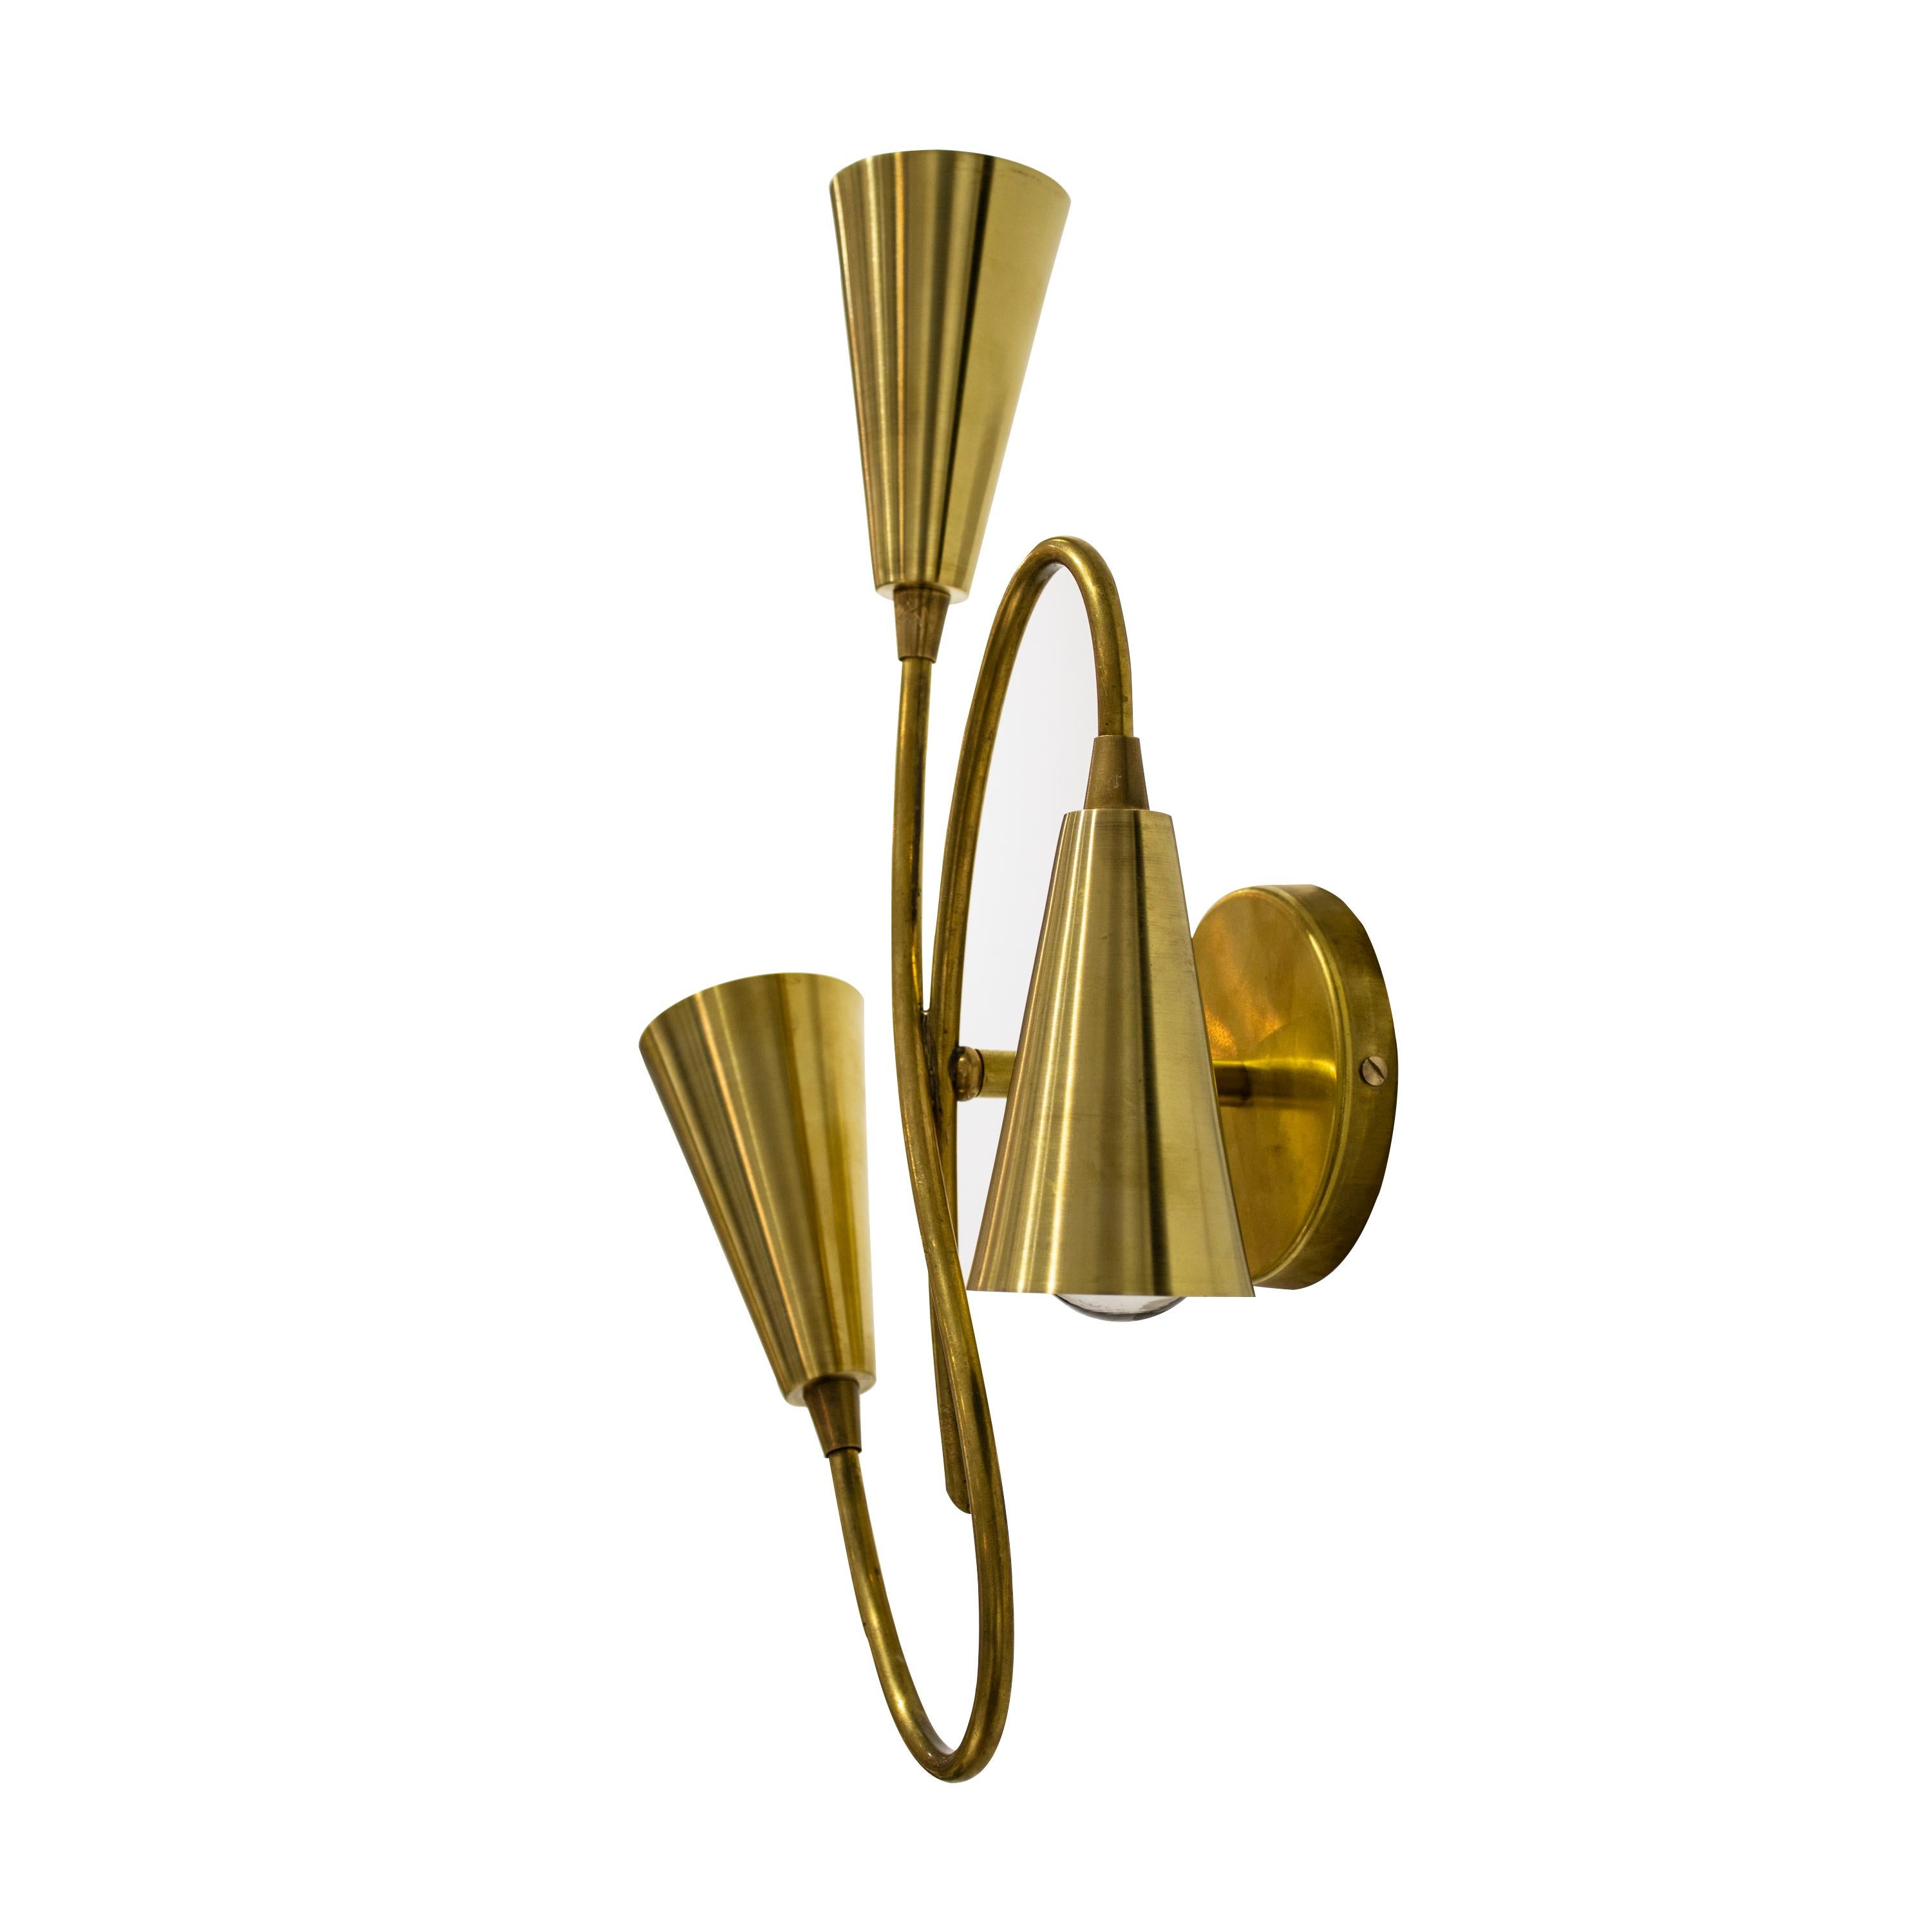 Pair of handcrafted Italian brass wall sconces. The lamps are made of curved brass tube structures with three light sources enclosed in cone lampshades in Stilnovo style. The lamp is attached to the wall through a round brass base. 



